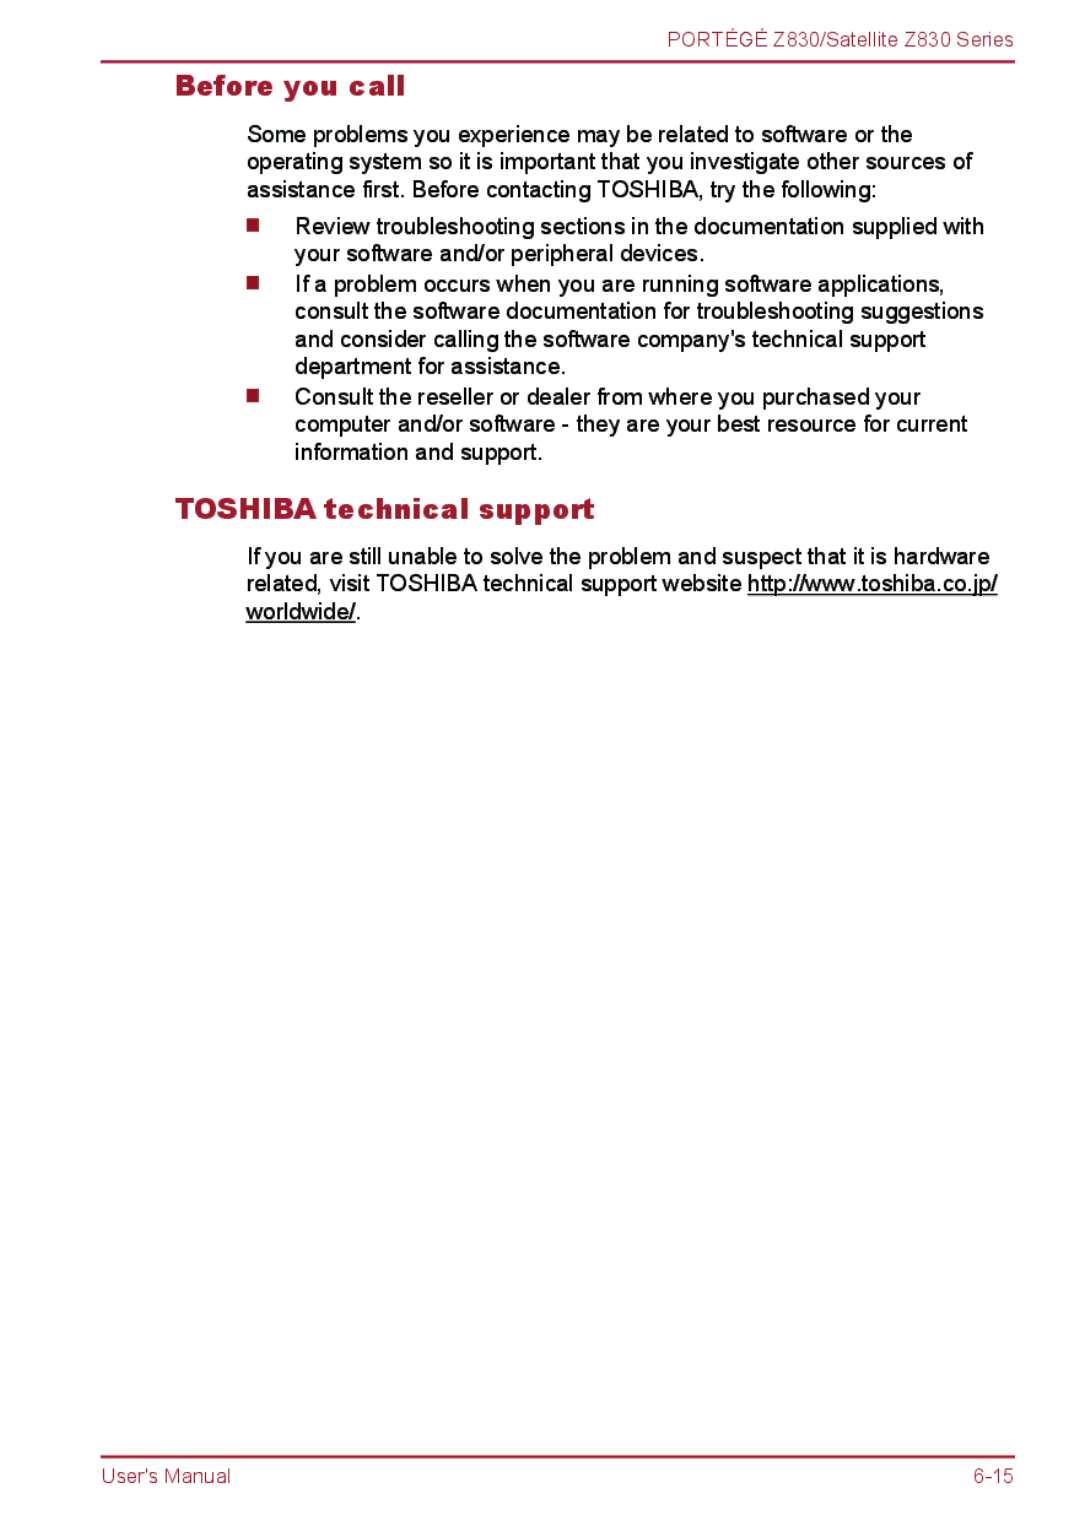 Toshiba Z830 user manual Before you call, Toshiba technical support 